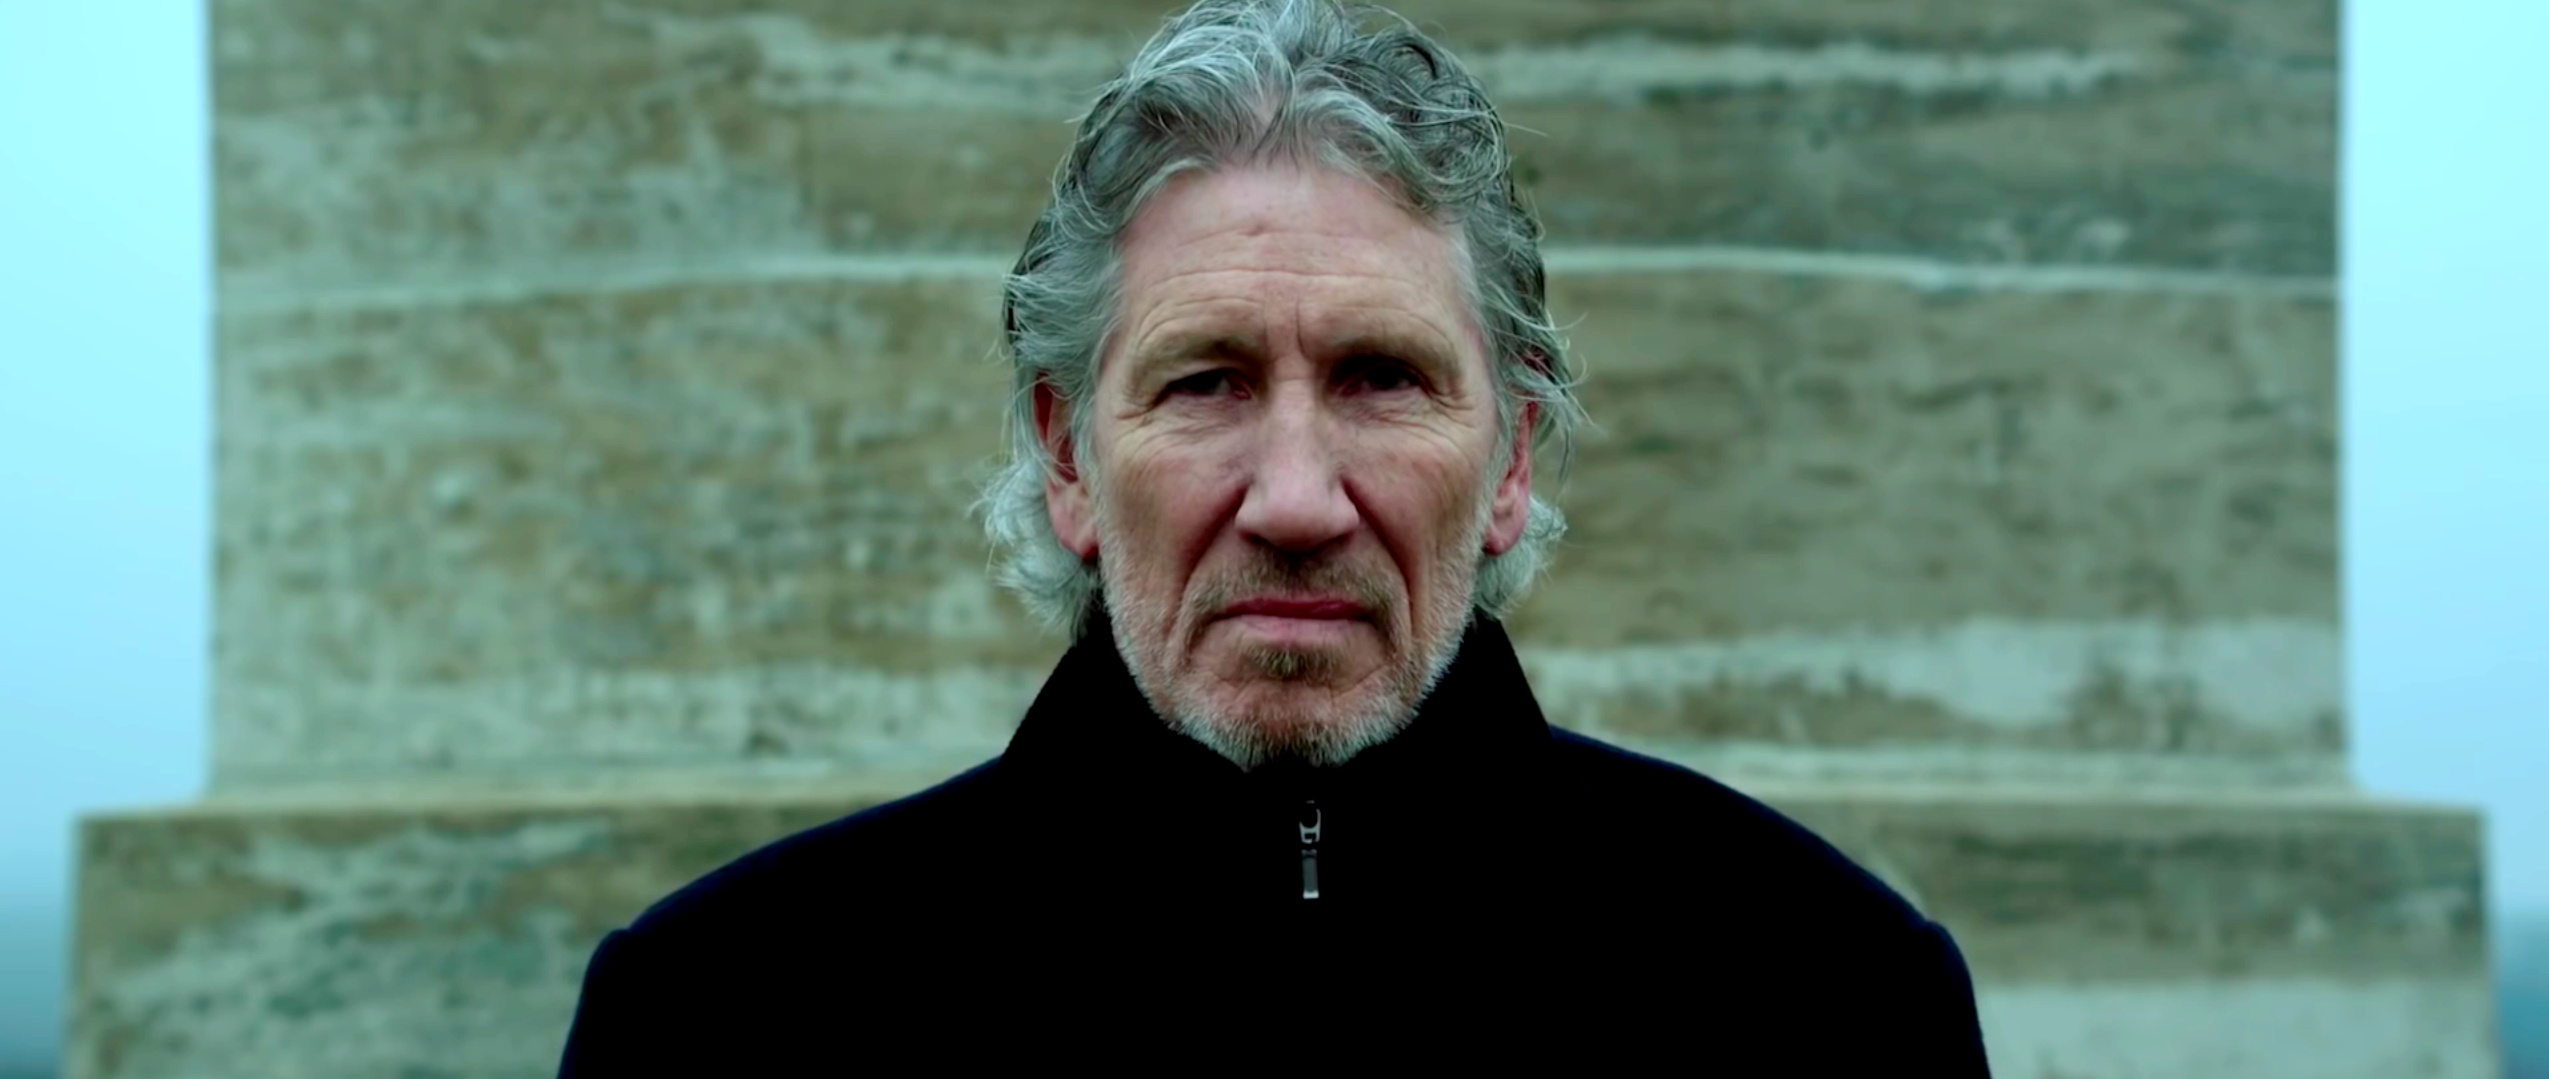 Is This the Life We Really Want? Roger Waters' new album